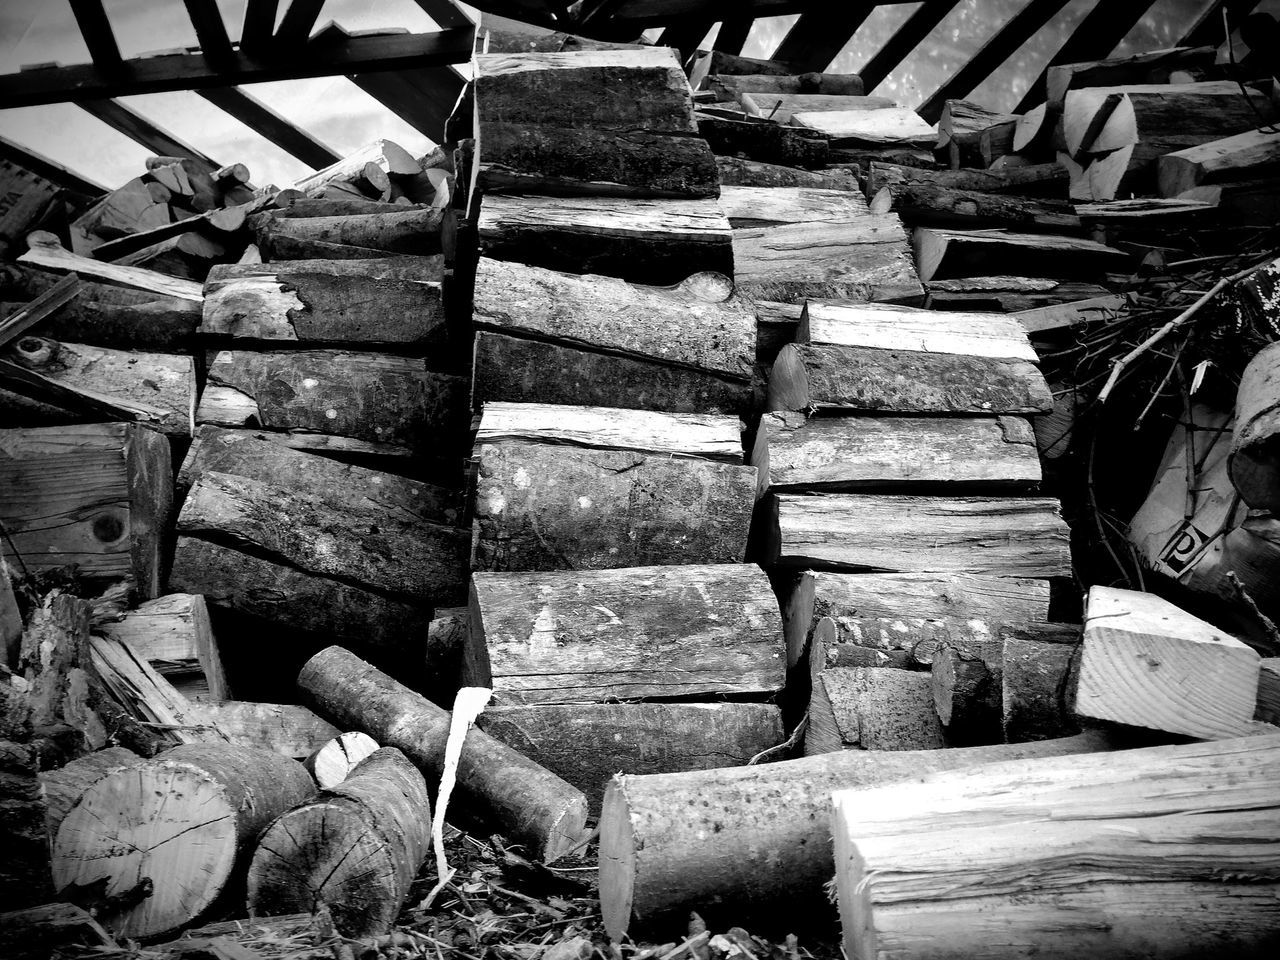 wood - material, stack, large group of objects, firewood, wooden, log, lumber industry, abundance, in a row, steps, old, wood, timber, deforestation, textured, abandoned, close-up, no people, day, stone wall